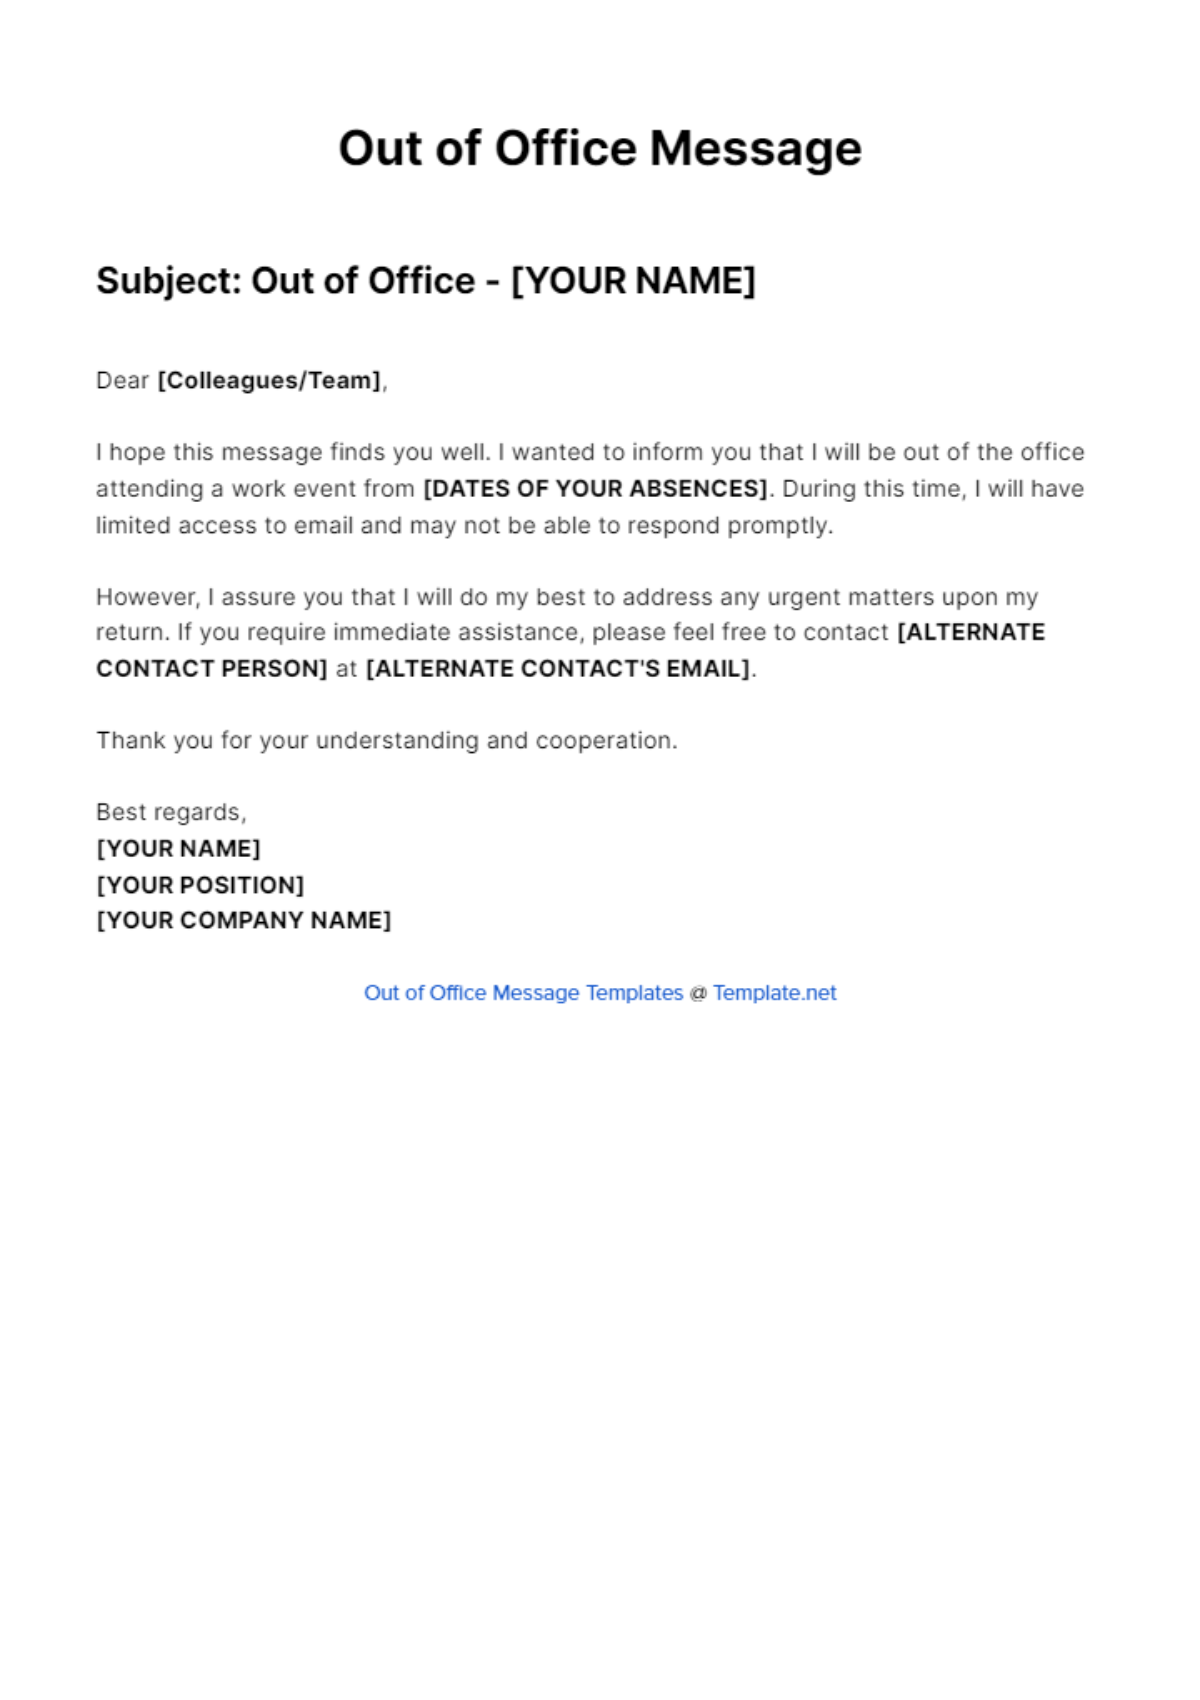 Free Out Of Office Message For Work Event Template